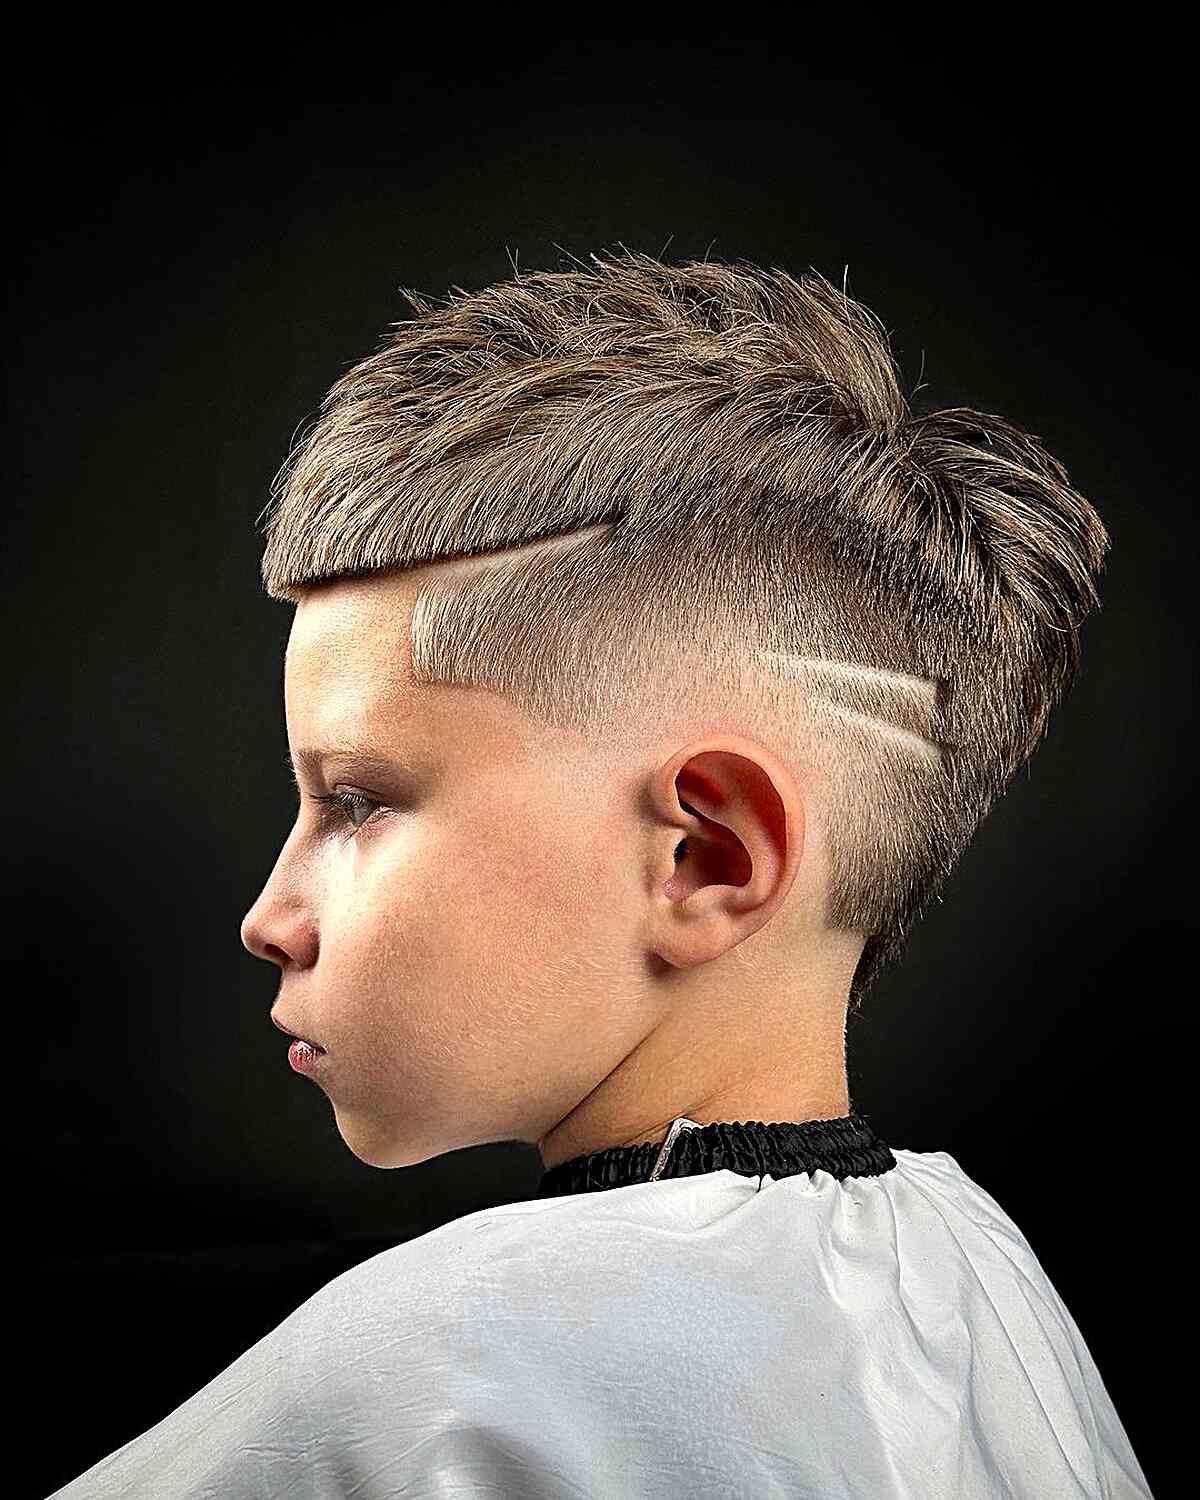 Cool Shaved Designs on a Short Cut for Little Boys